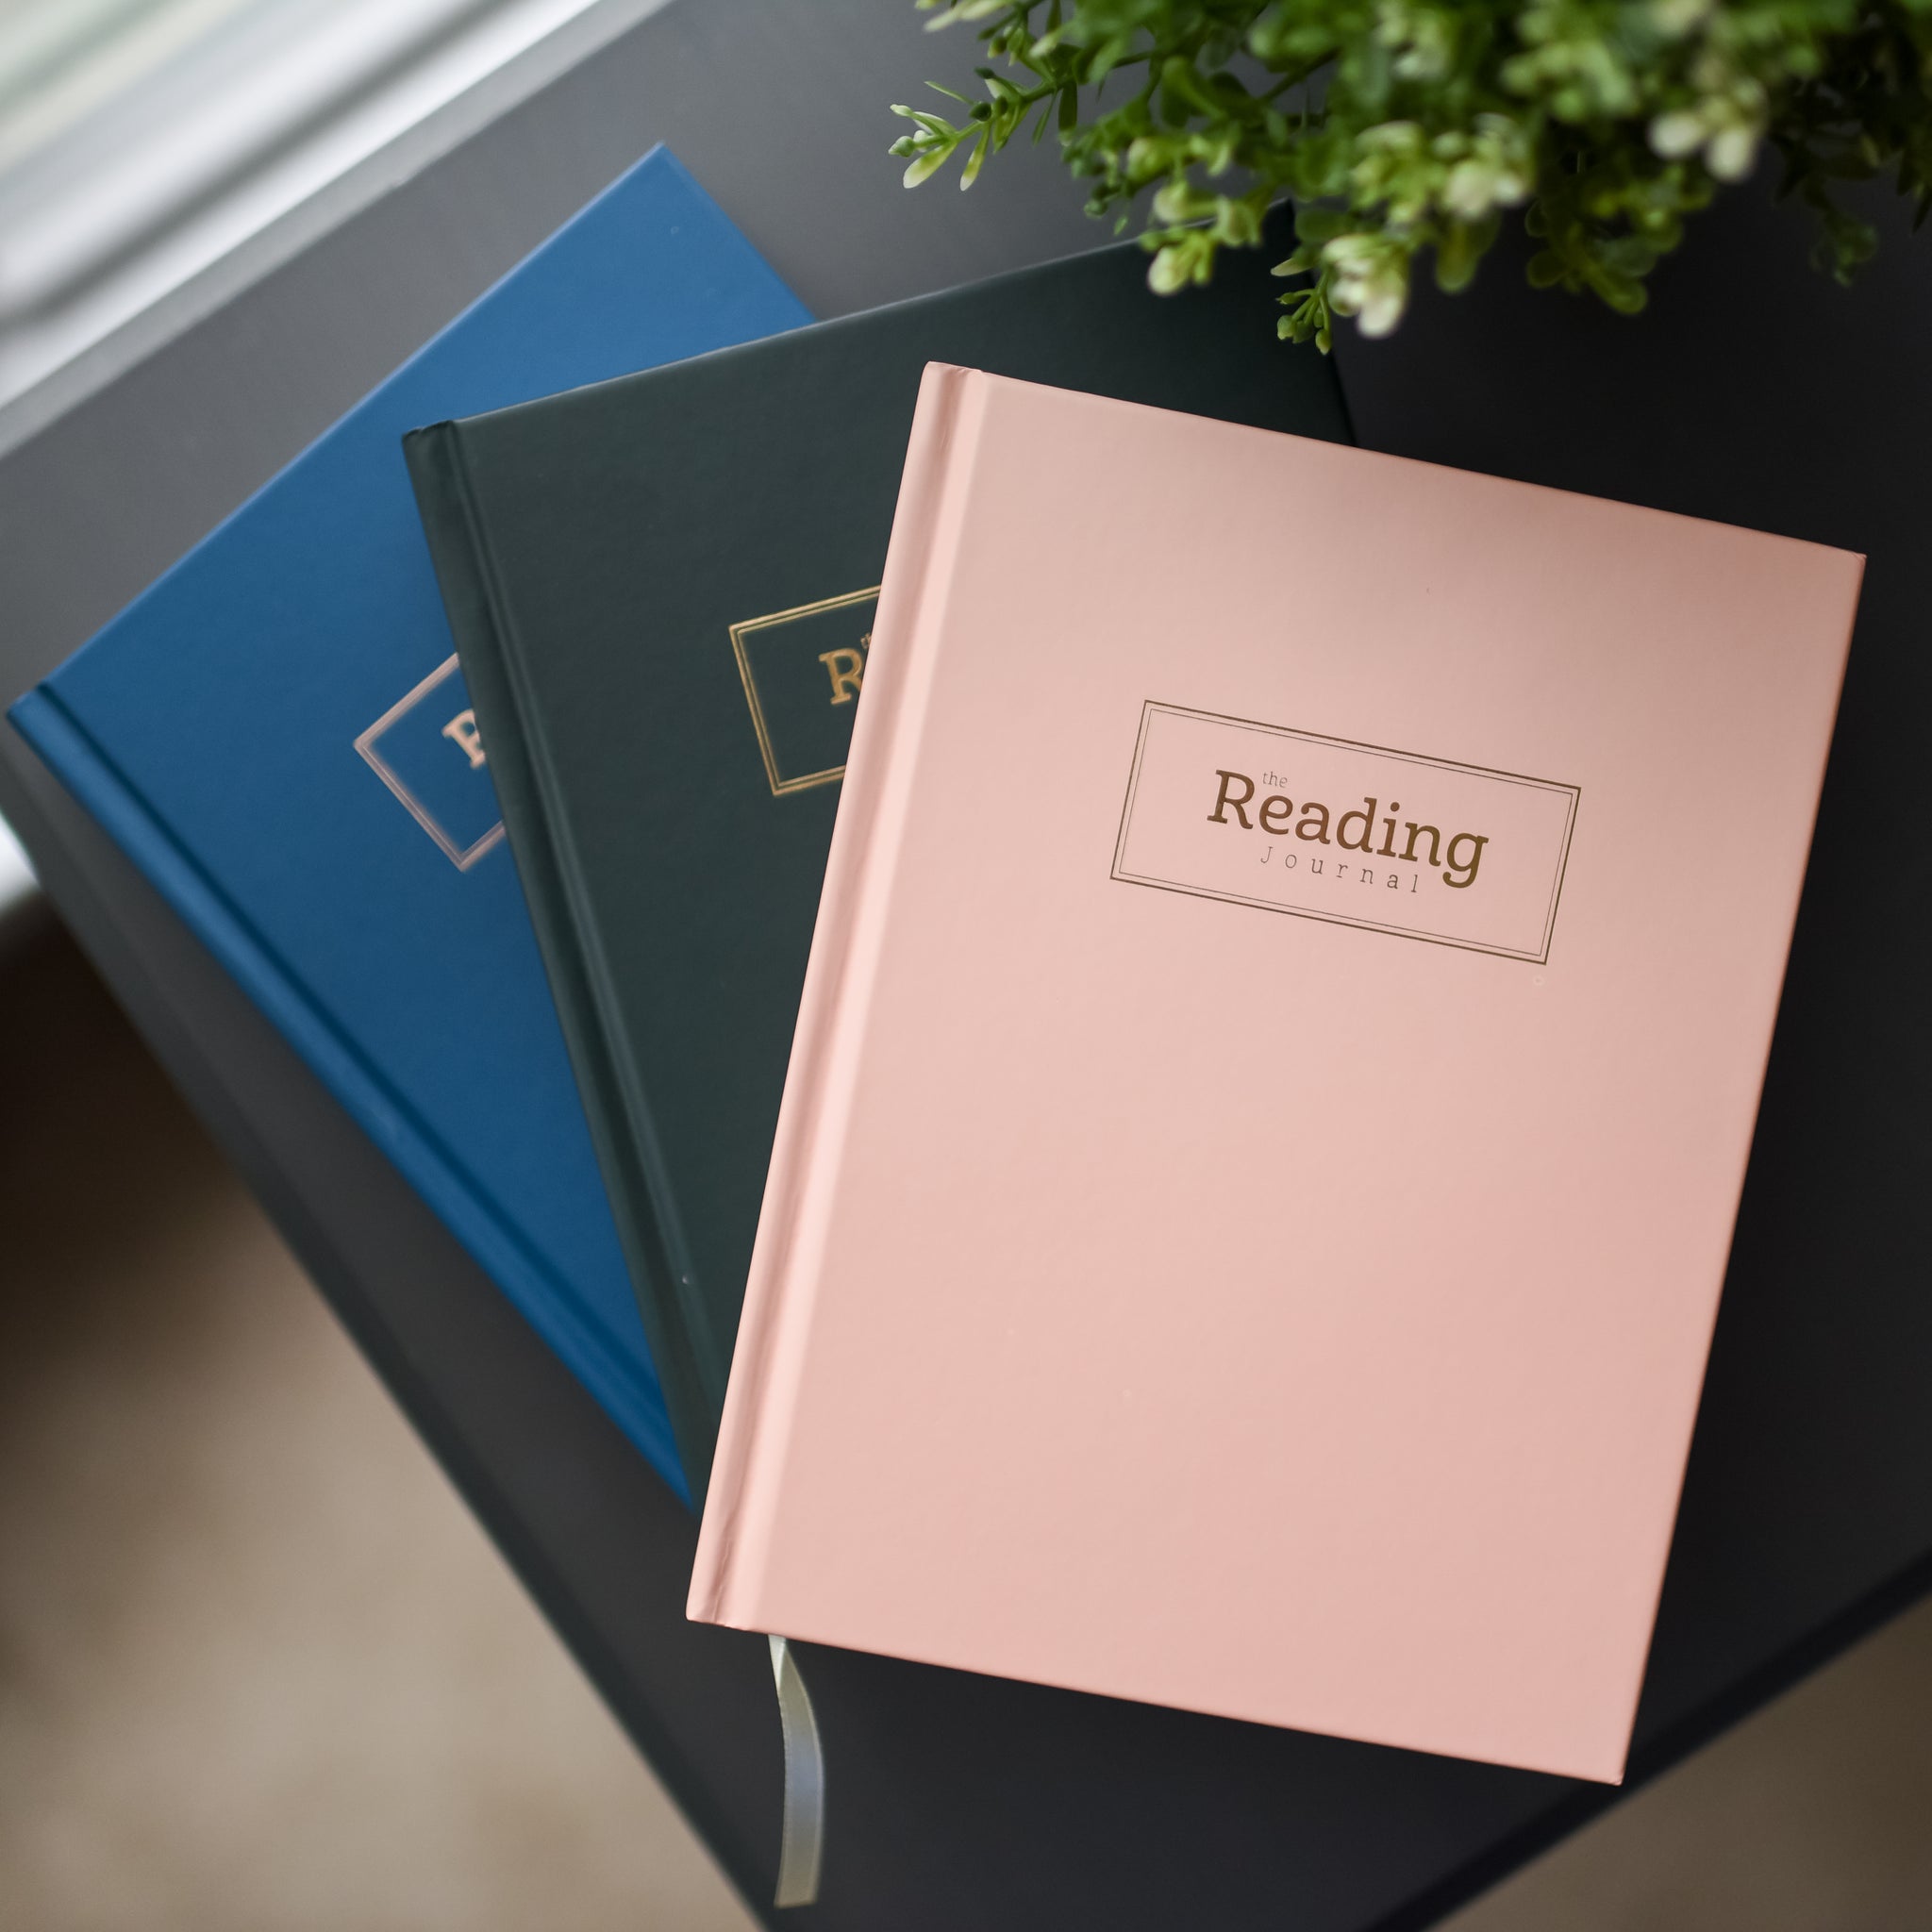 How to keep a reading journal - The Pen Company Blog